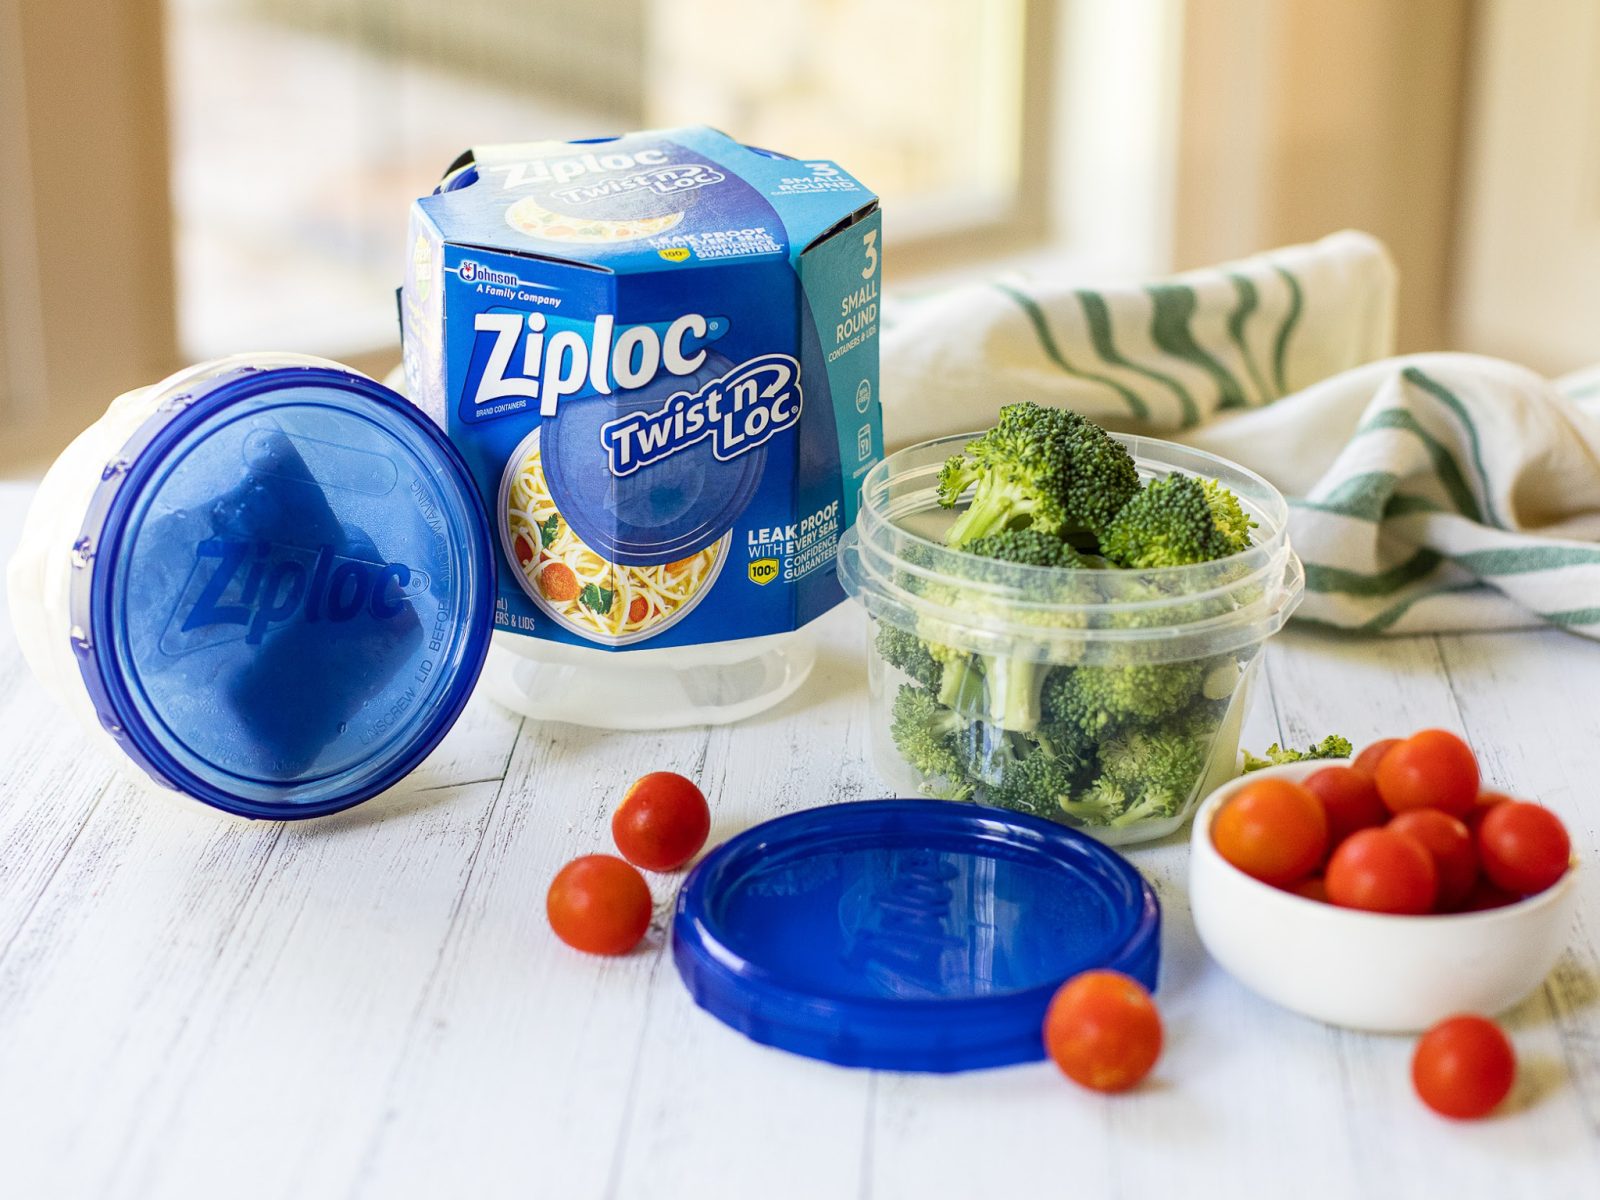 Grab The Packs Of Ziploc Bowls For Just $2 At Kroger